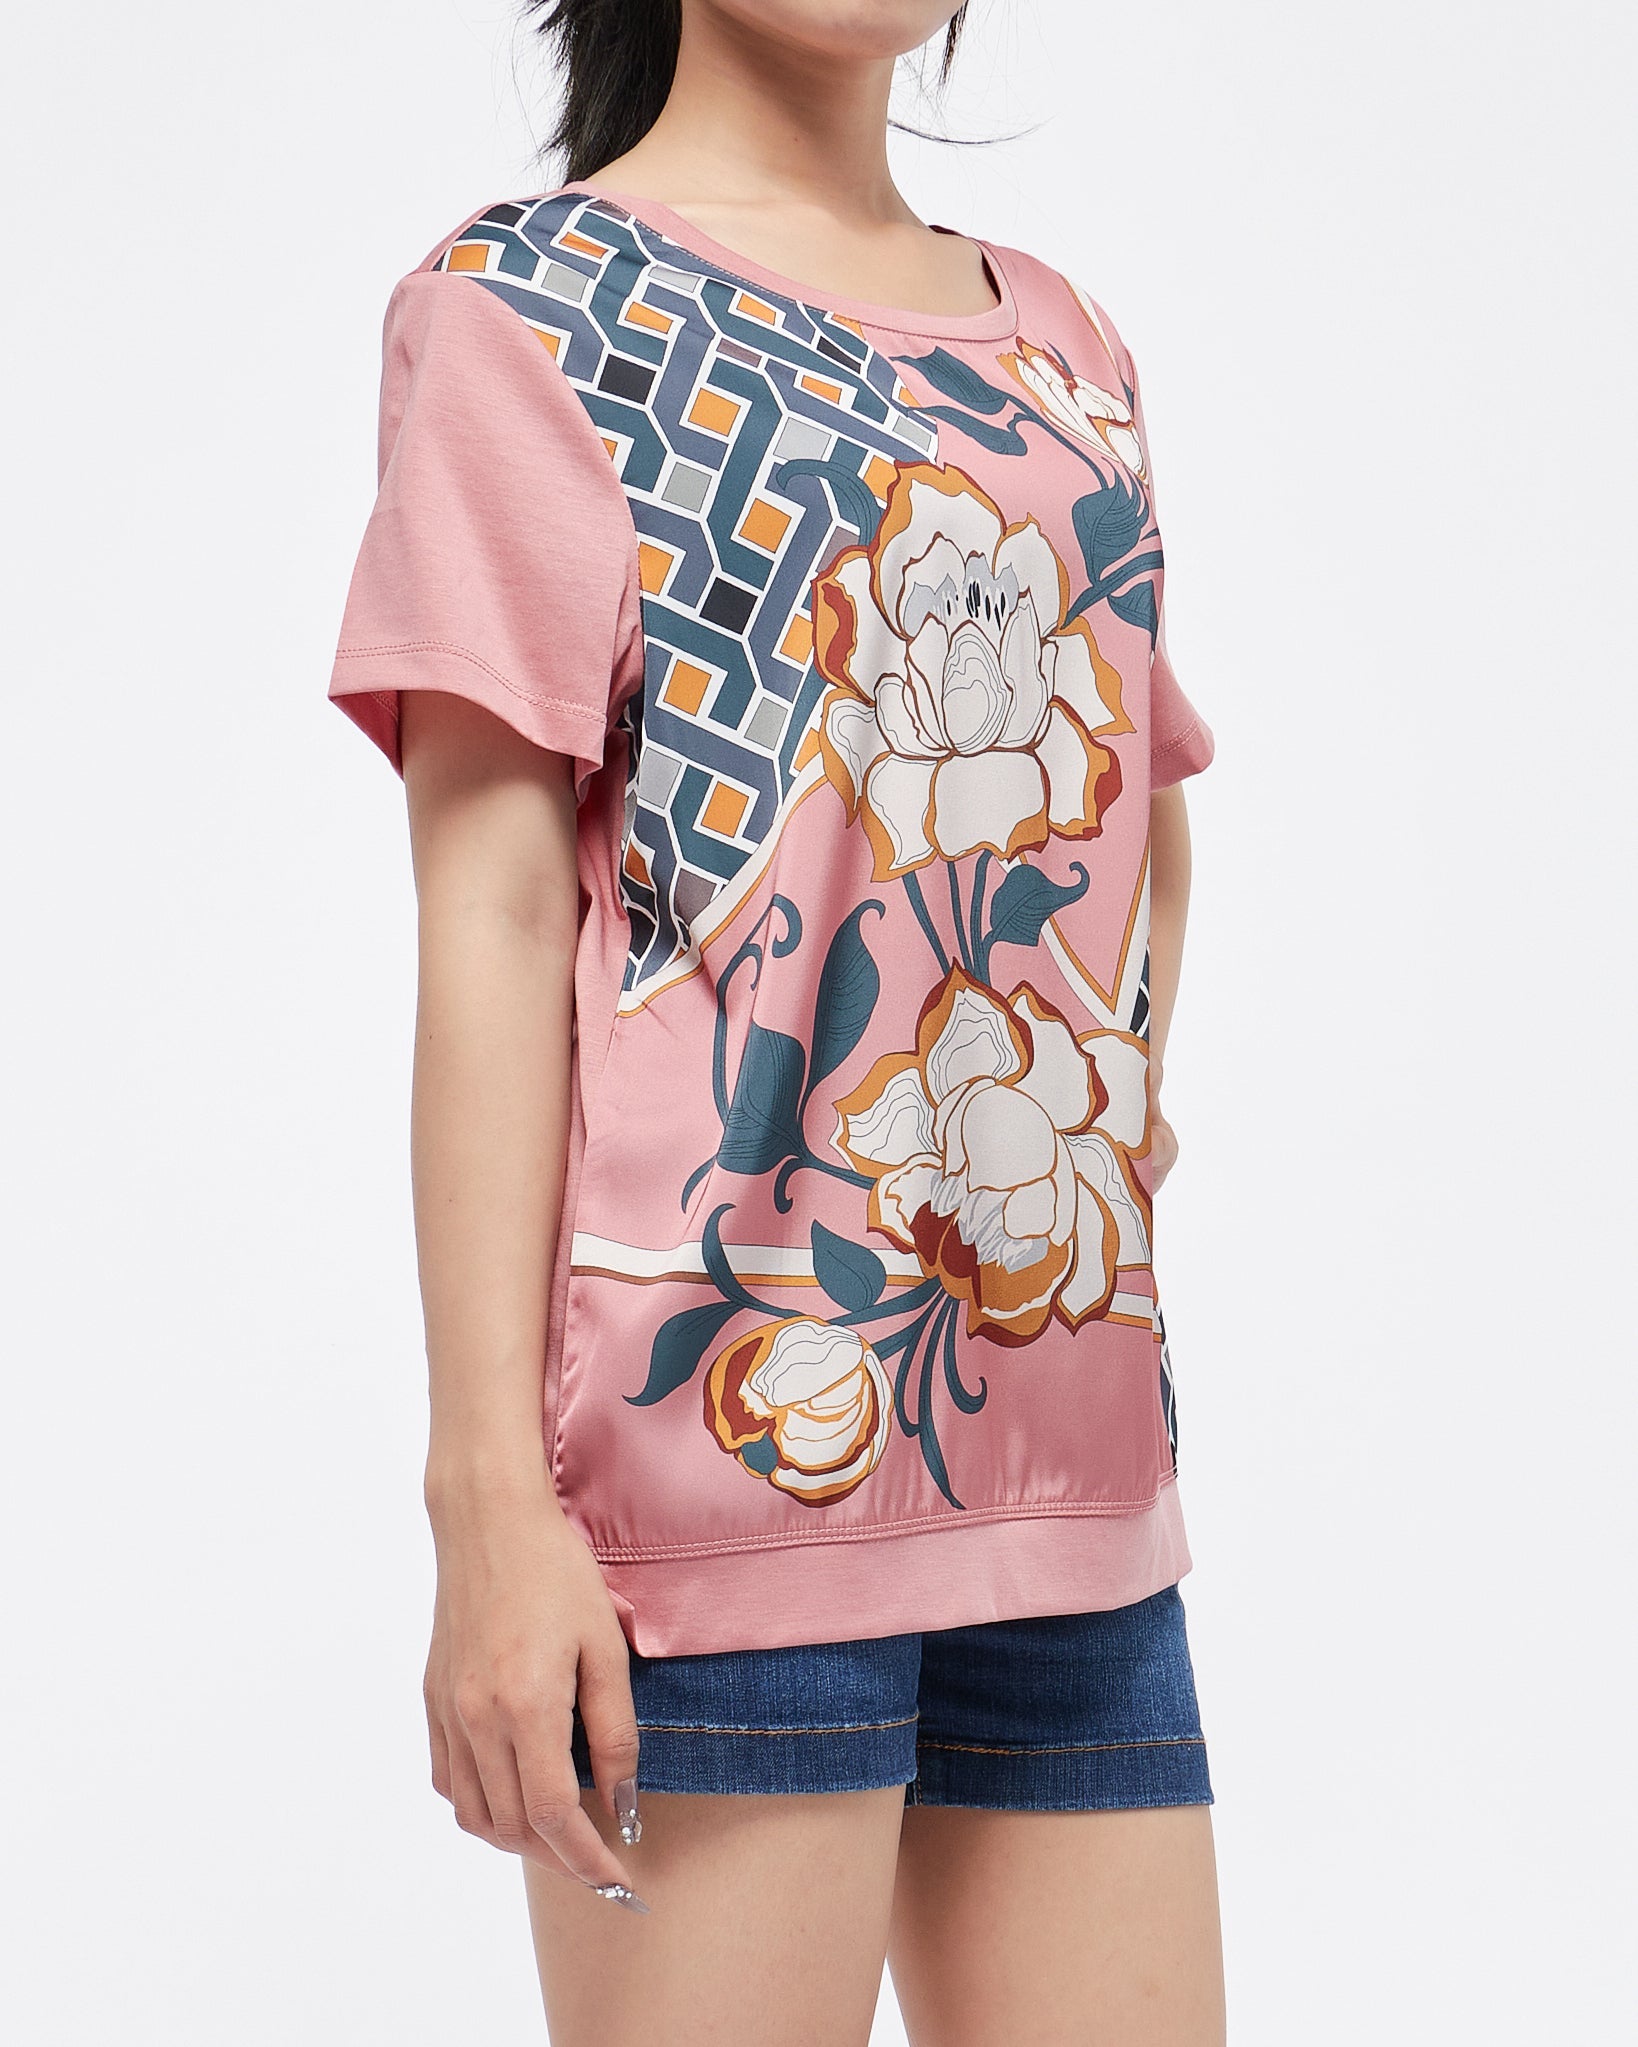 MOI OUTFIT-Floral Over Printed Lady T-Shirt 17.90